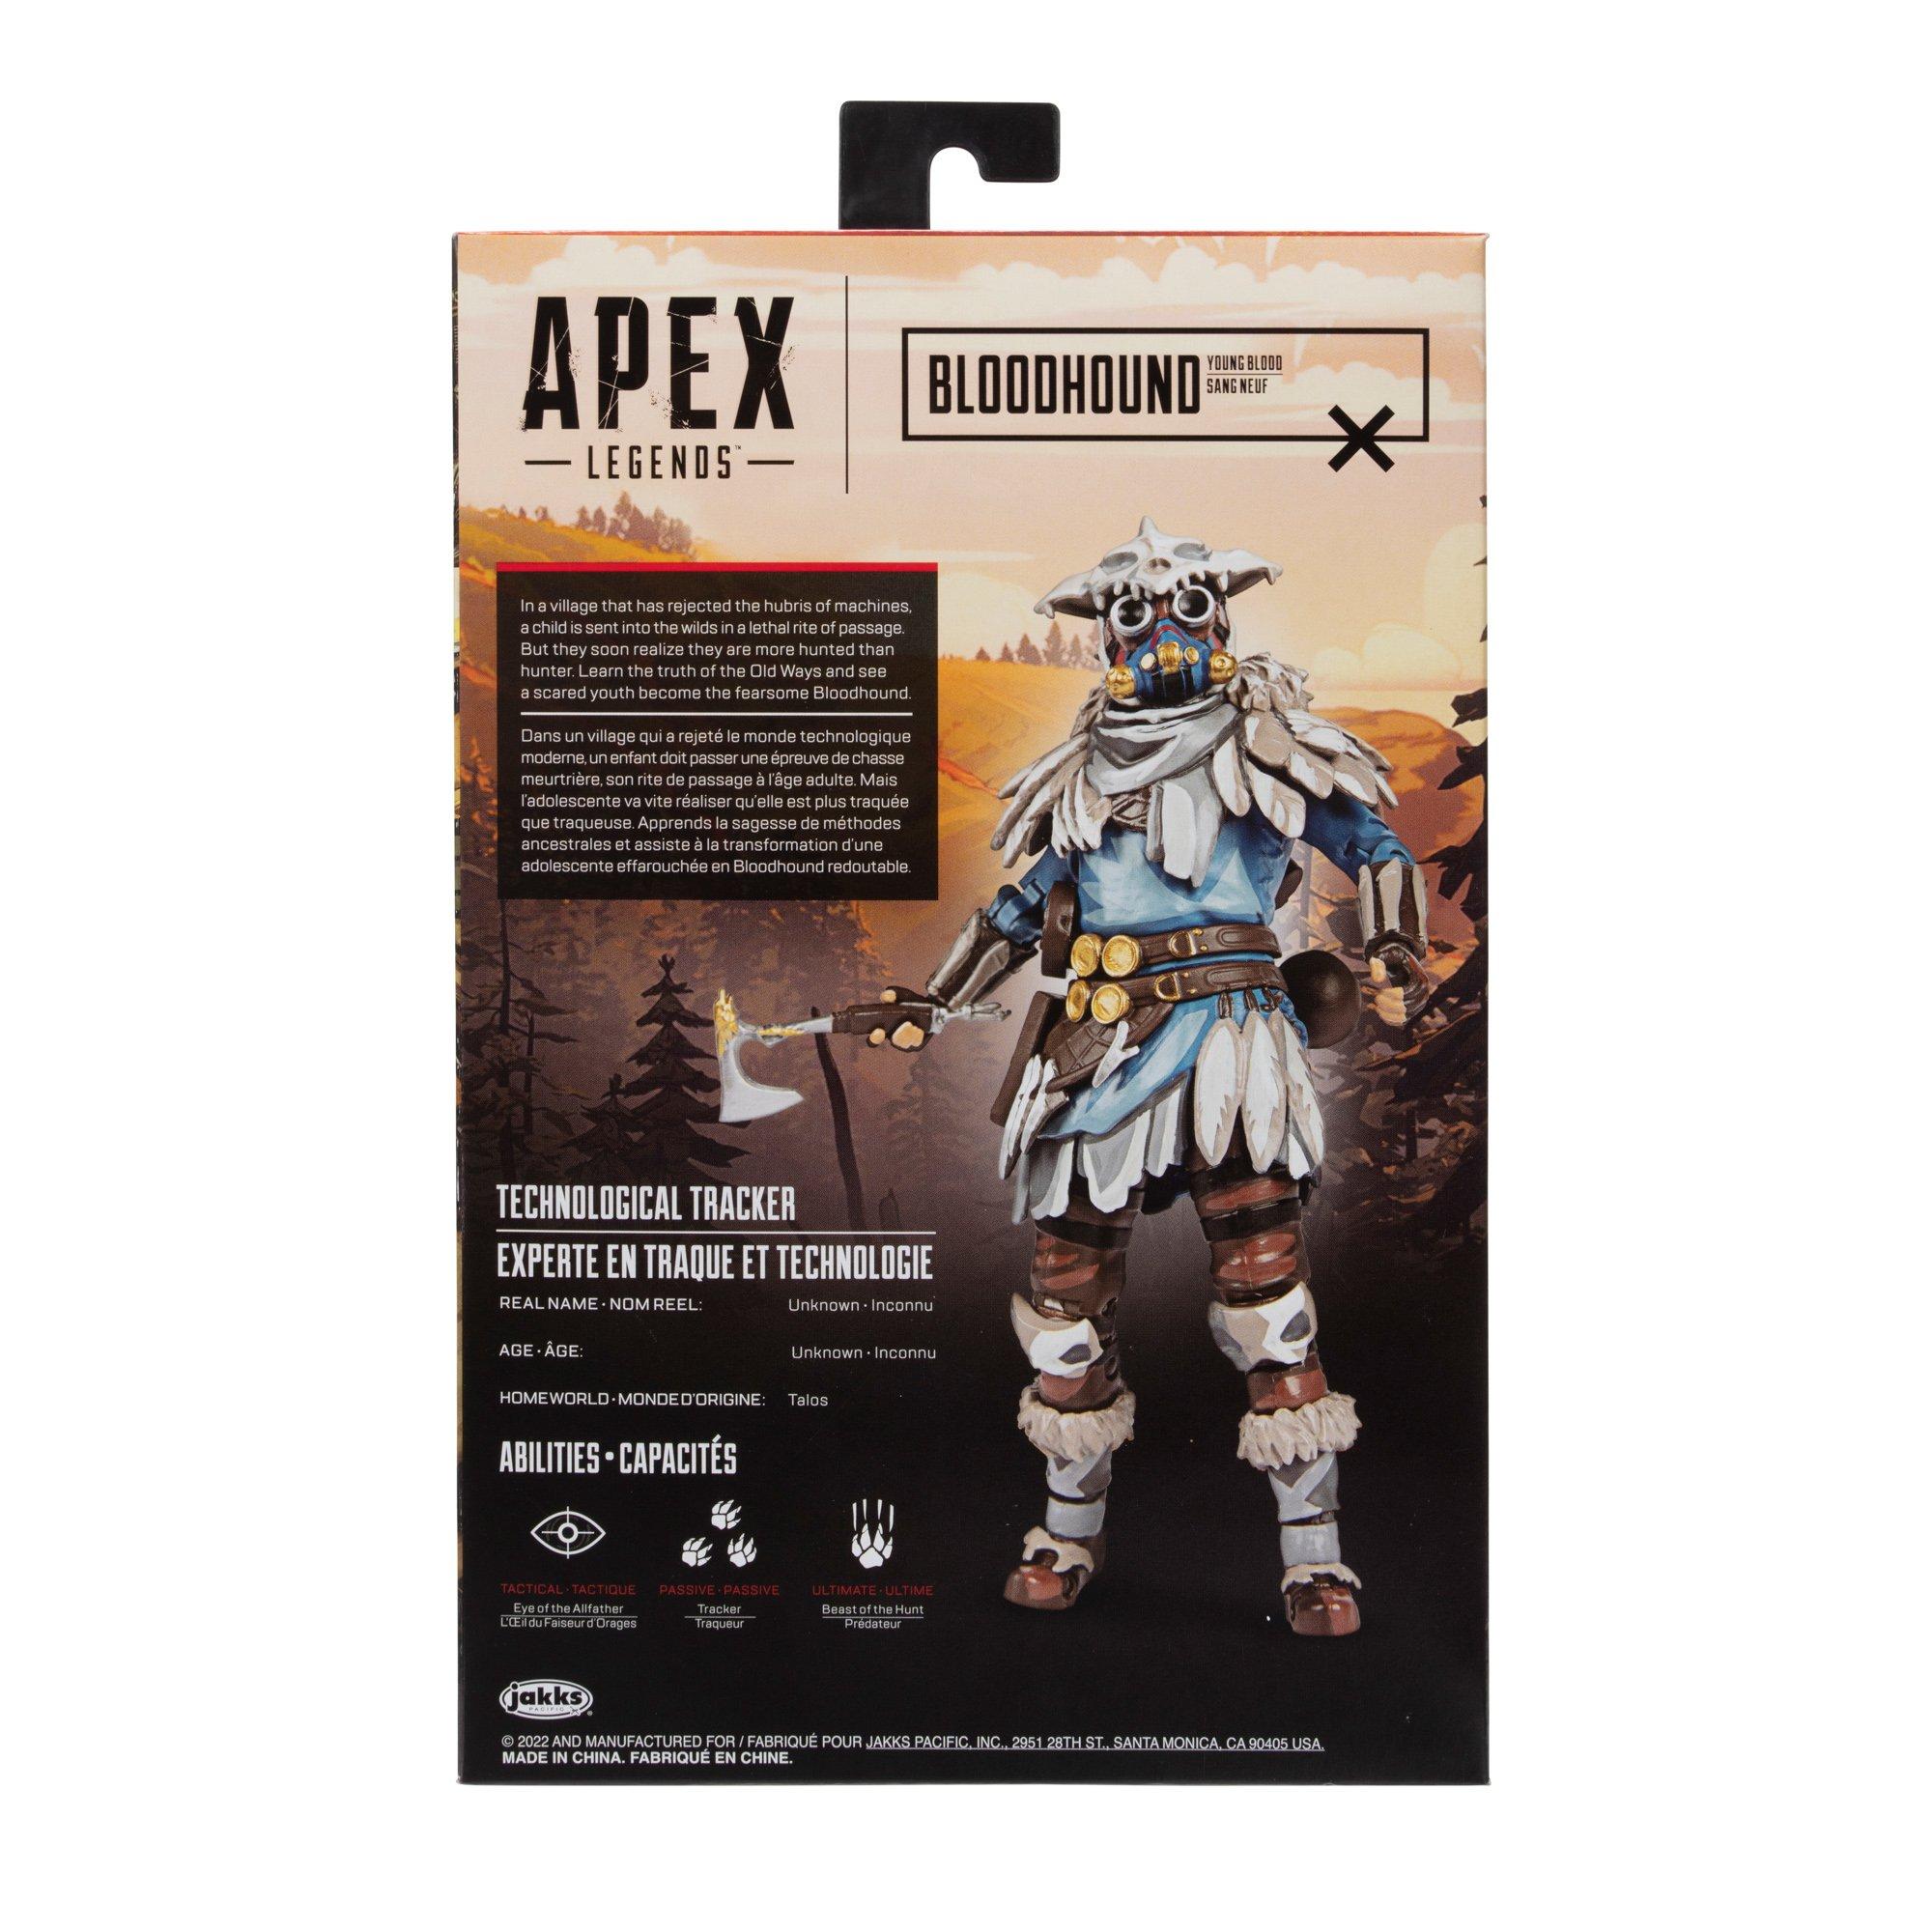 list item 14 of 14 Jakks Pacific Apex Legends: Old Ways, New Dawn Bloodhound Young Blood with Legendary Skin 6-in Action Figure GameStop Exclusive